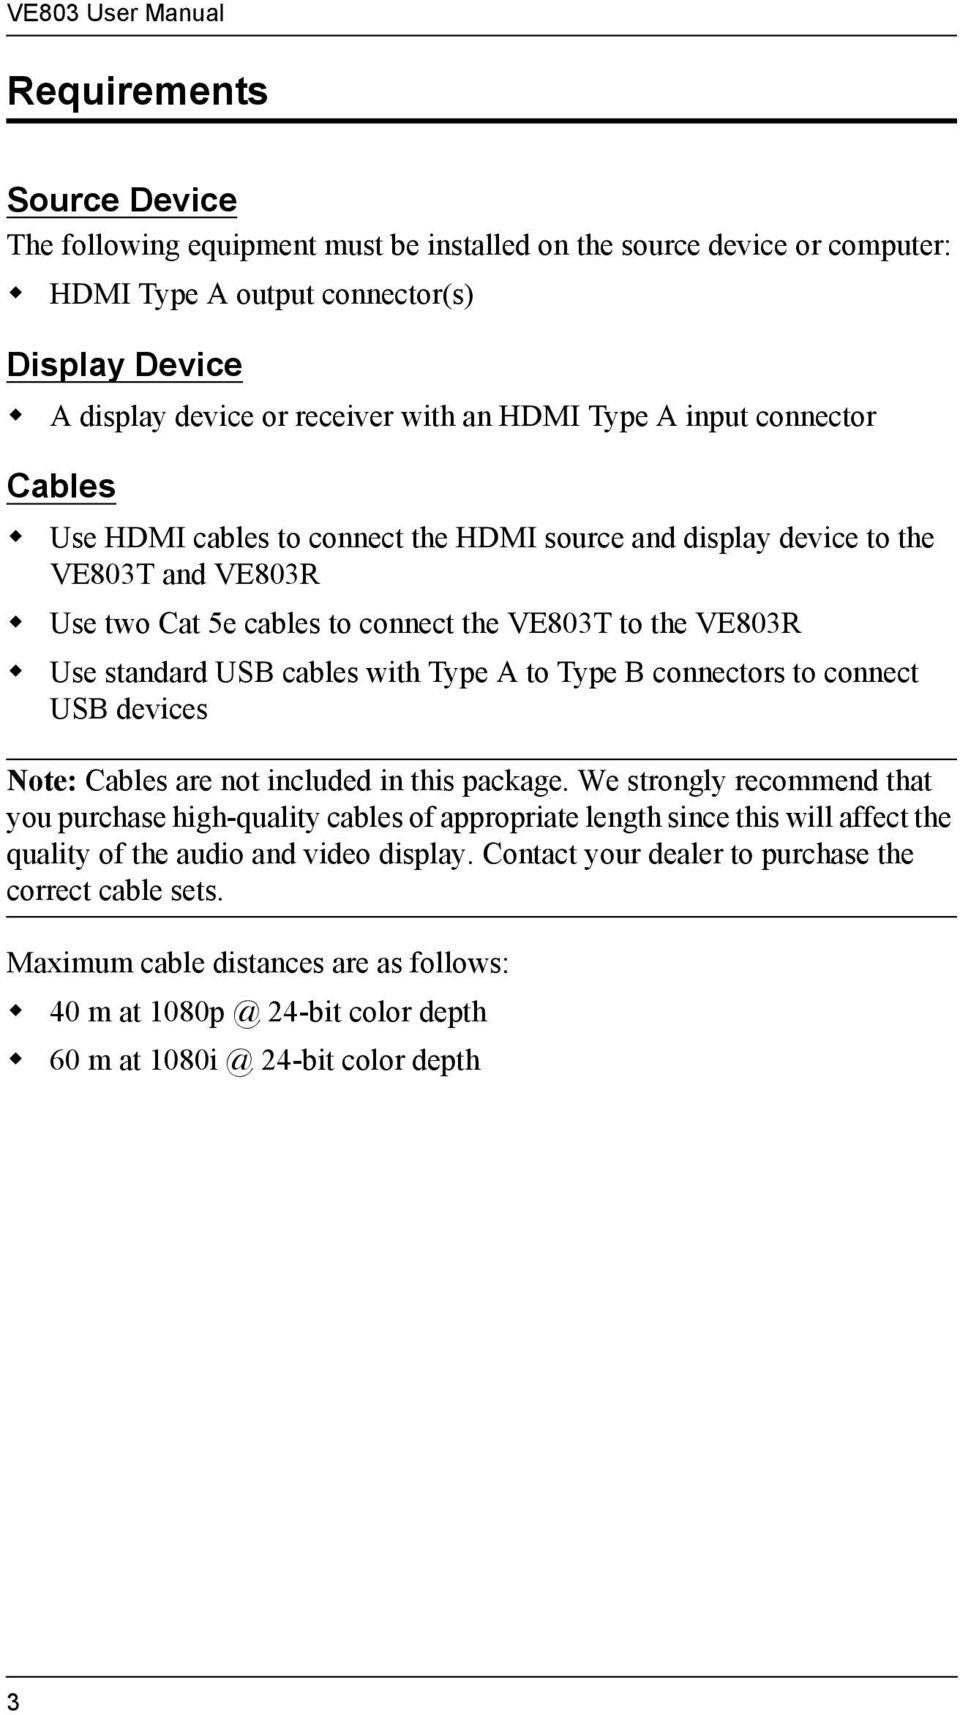 standard USB cables with Type A to Type B connectors to connect USB devices Note: Cables are not included in this package.